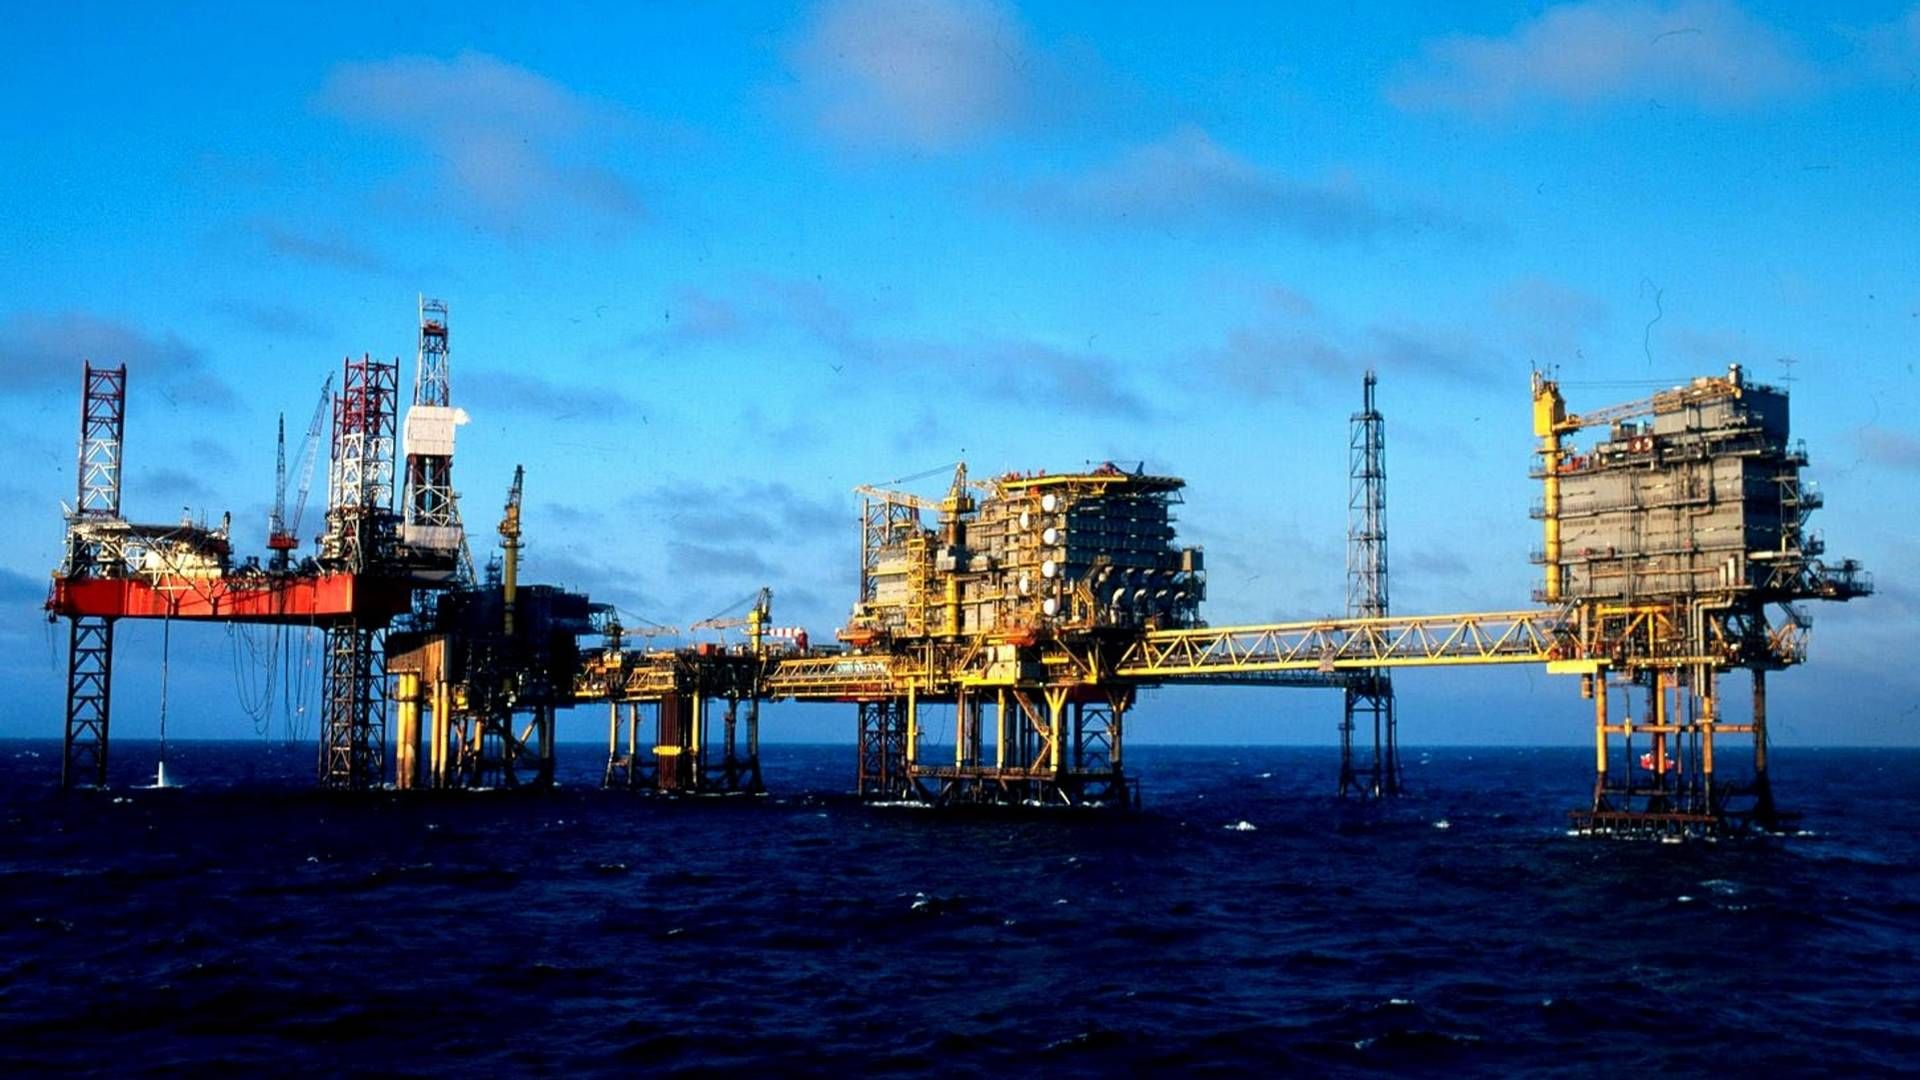 The Gorm field is one of four oil and gas fields in the Danish North Sea where the Danish Energy Agency believes to have made errors in the environmental assessment statements prior to issuing permits.